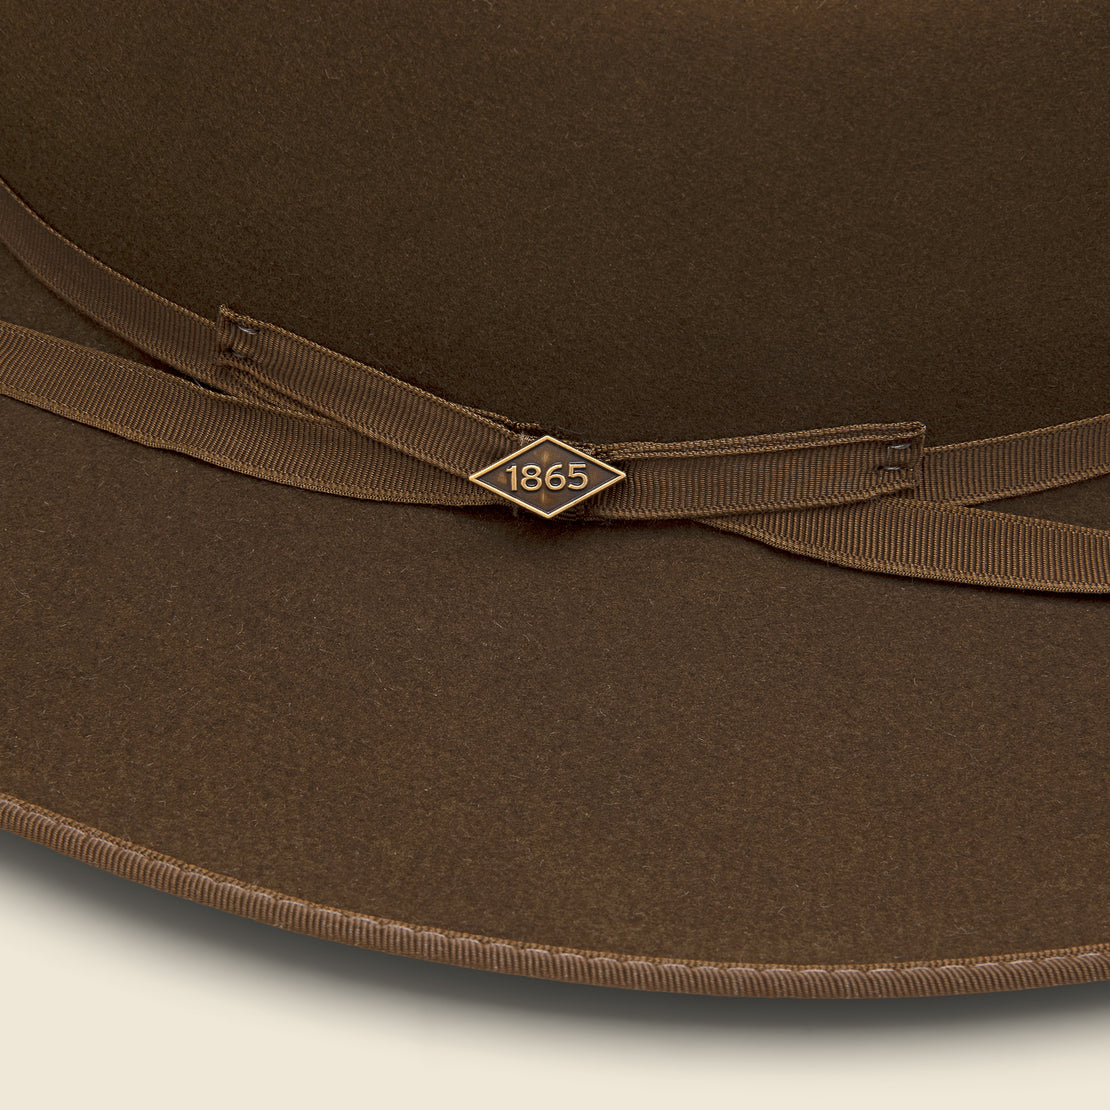 Pure Open Road Hat - Tobacco - Stetson - STAG Provisions - Accessories - Hats